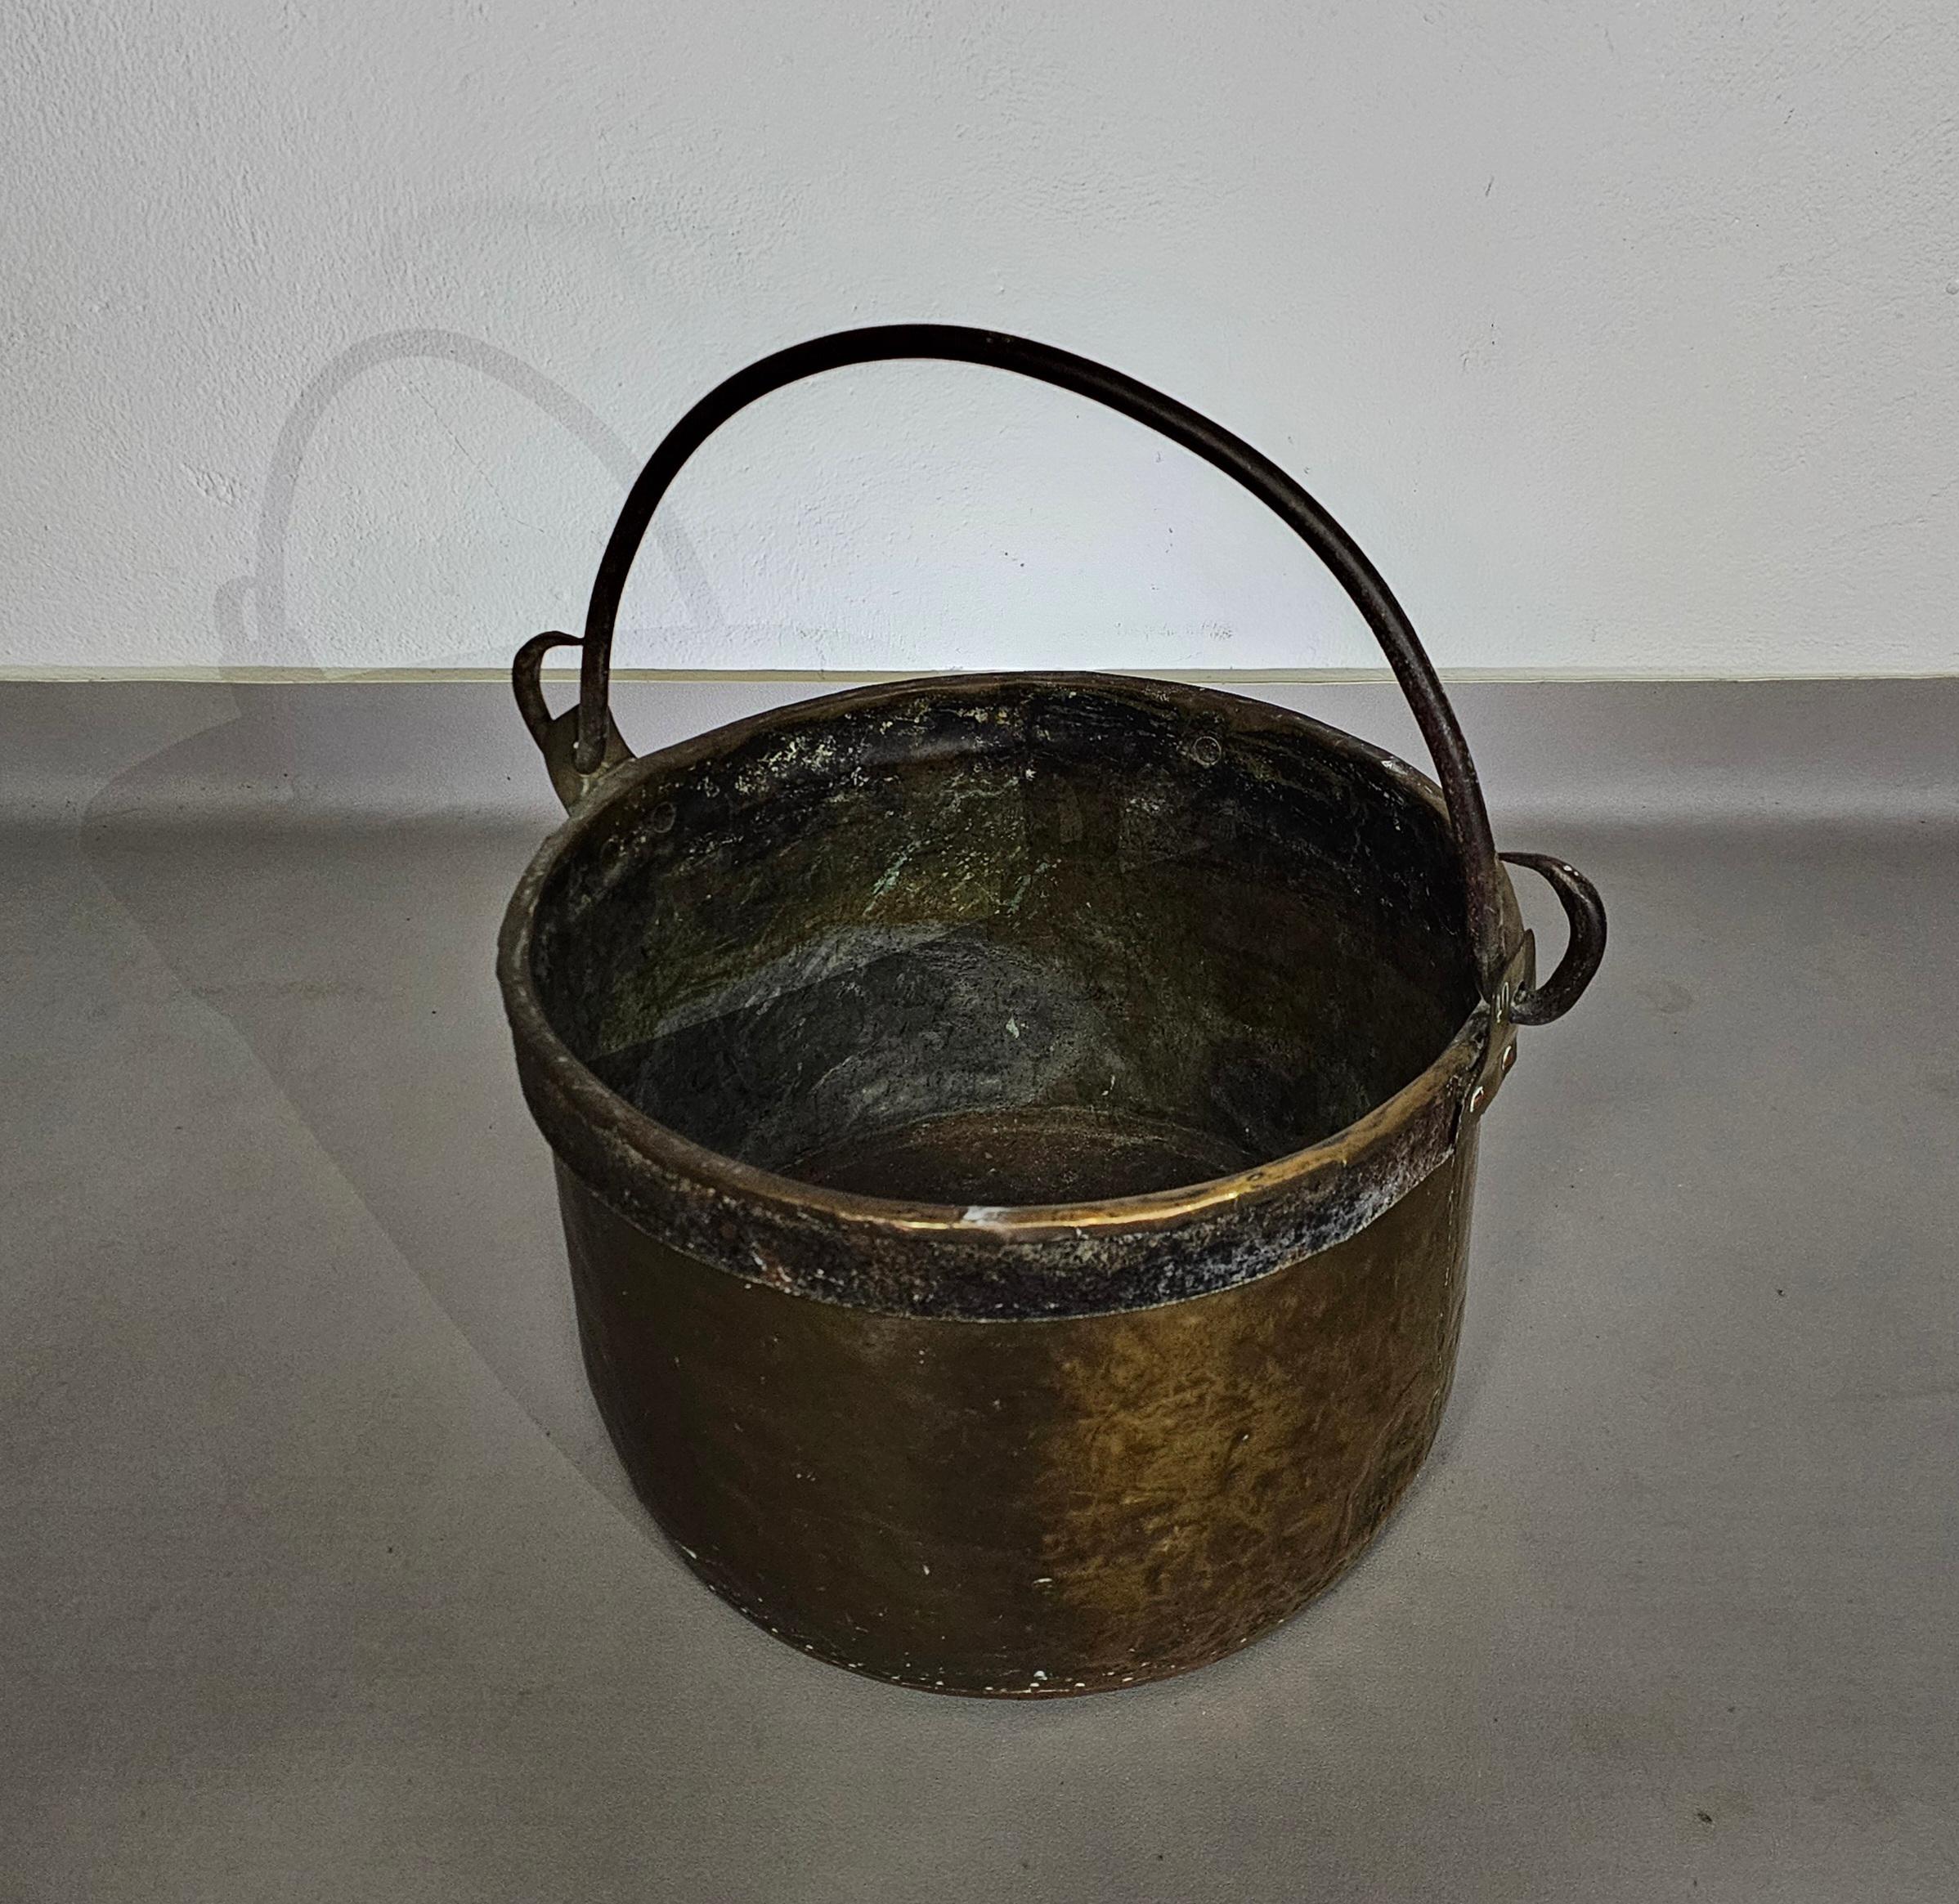 Other  Dutch / Handled Fireplace - Copper / Brass - Bucket  For Sale